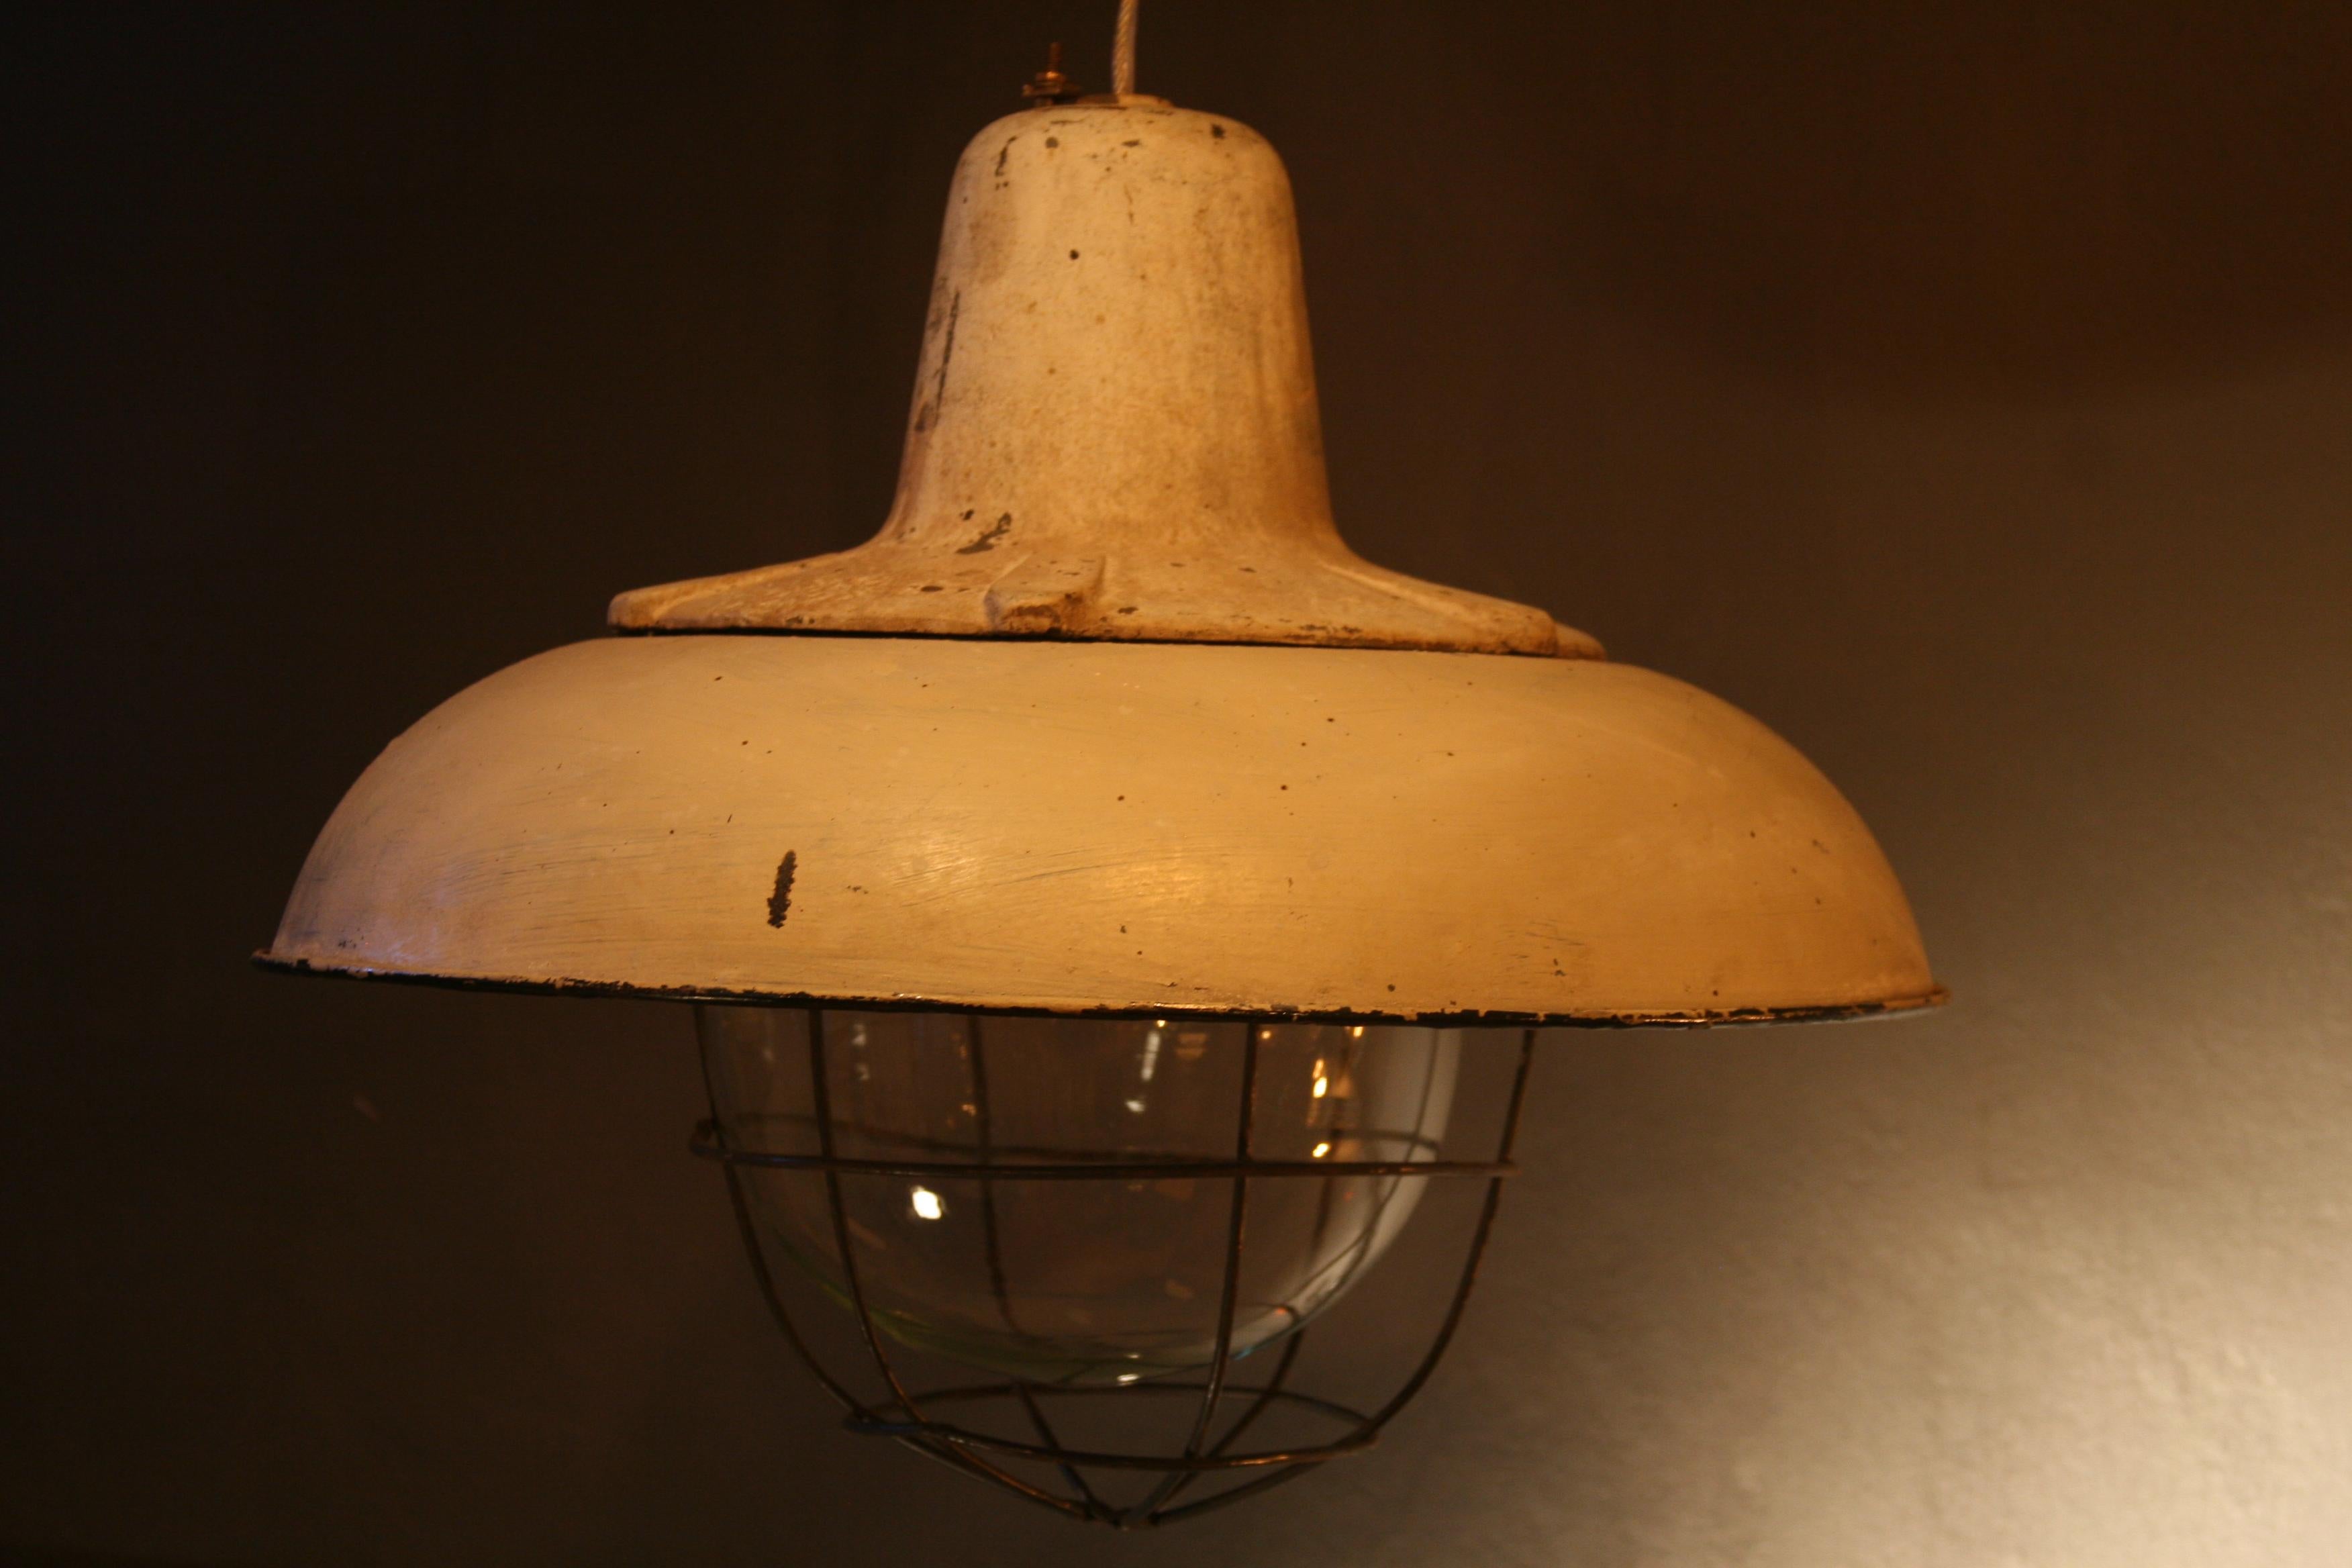 Primary use:
Hanging cast iron lamp with a reflector was used to illuminate factory and workshop premises where there was dust and the possibility of mechanical damage.
Producer: Undefined, country of origin: Poland
Production years: 1950s
The